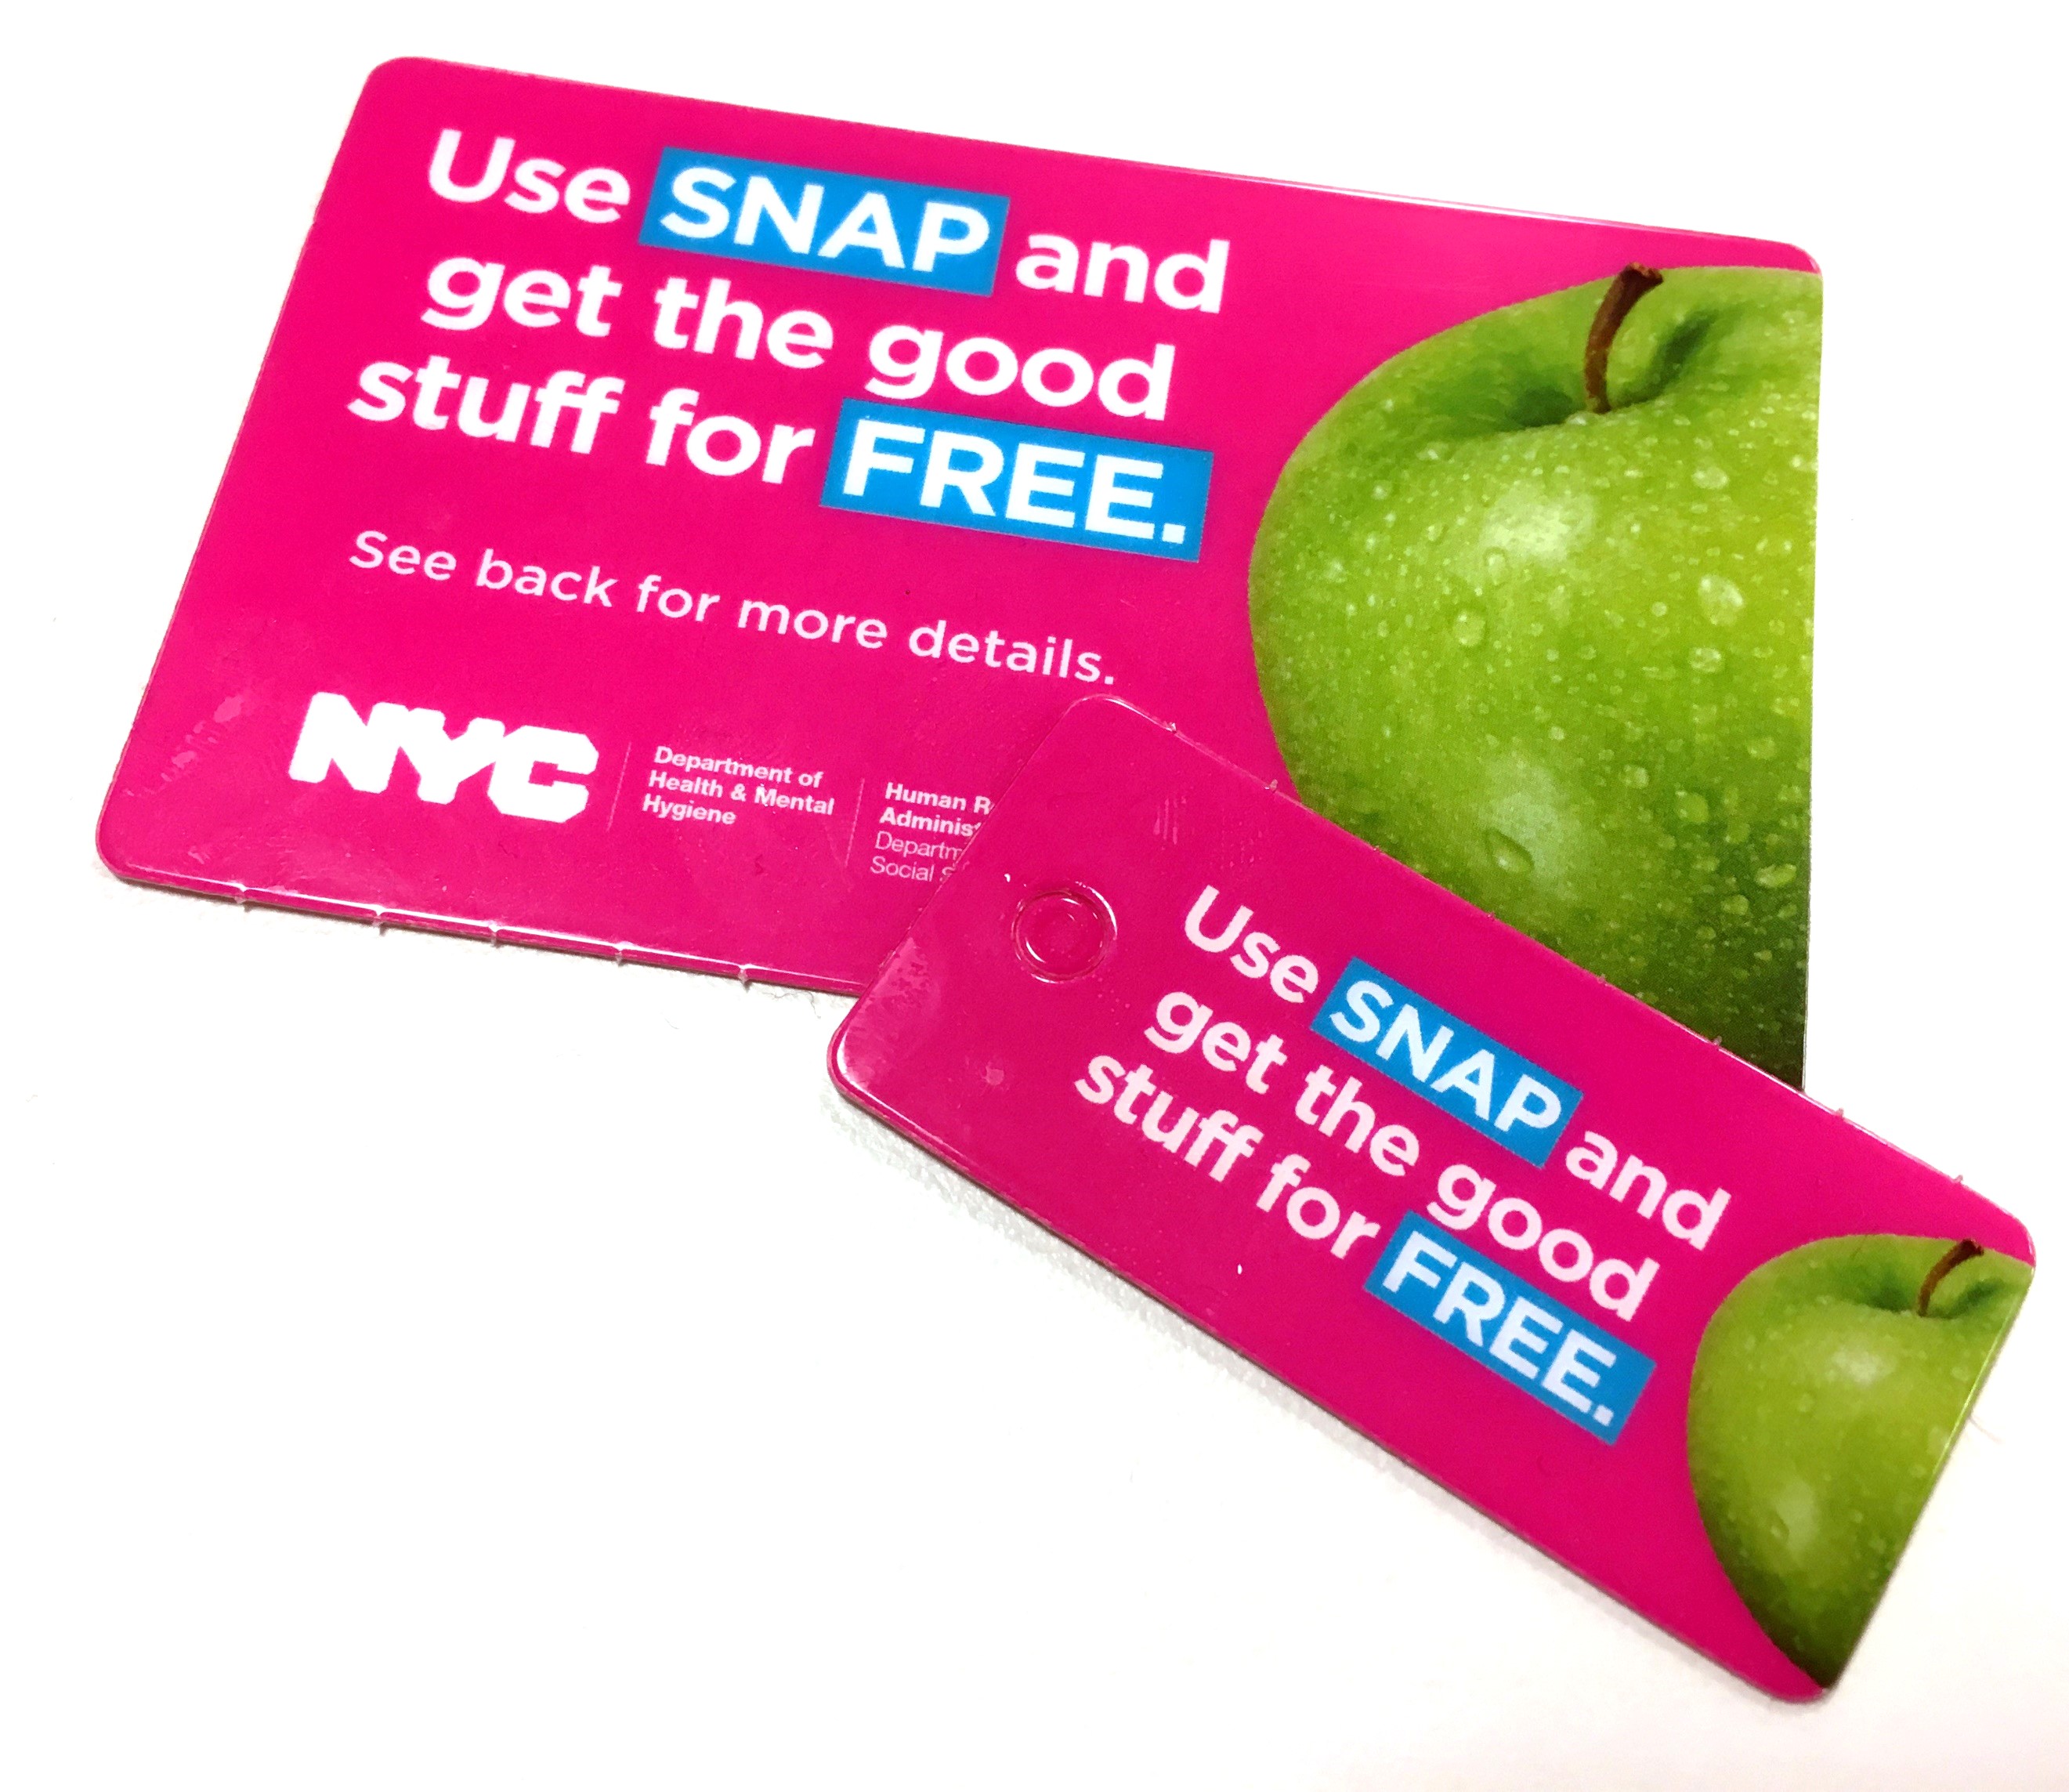 A program loyalty card and a key tag for the Get the Good Stuff program. Both have a picture of a freshly washed apple. Card reads: Use SNAP and get the good stuff for free.